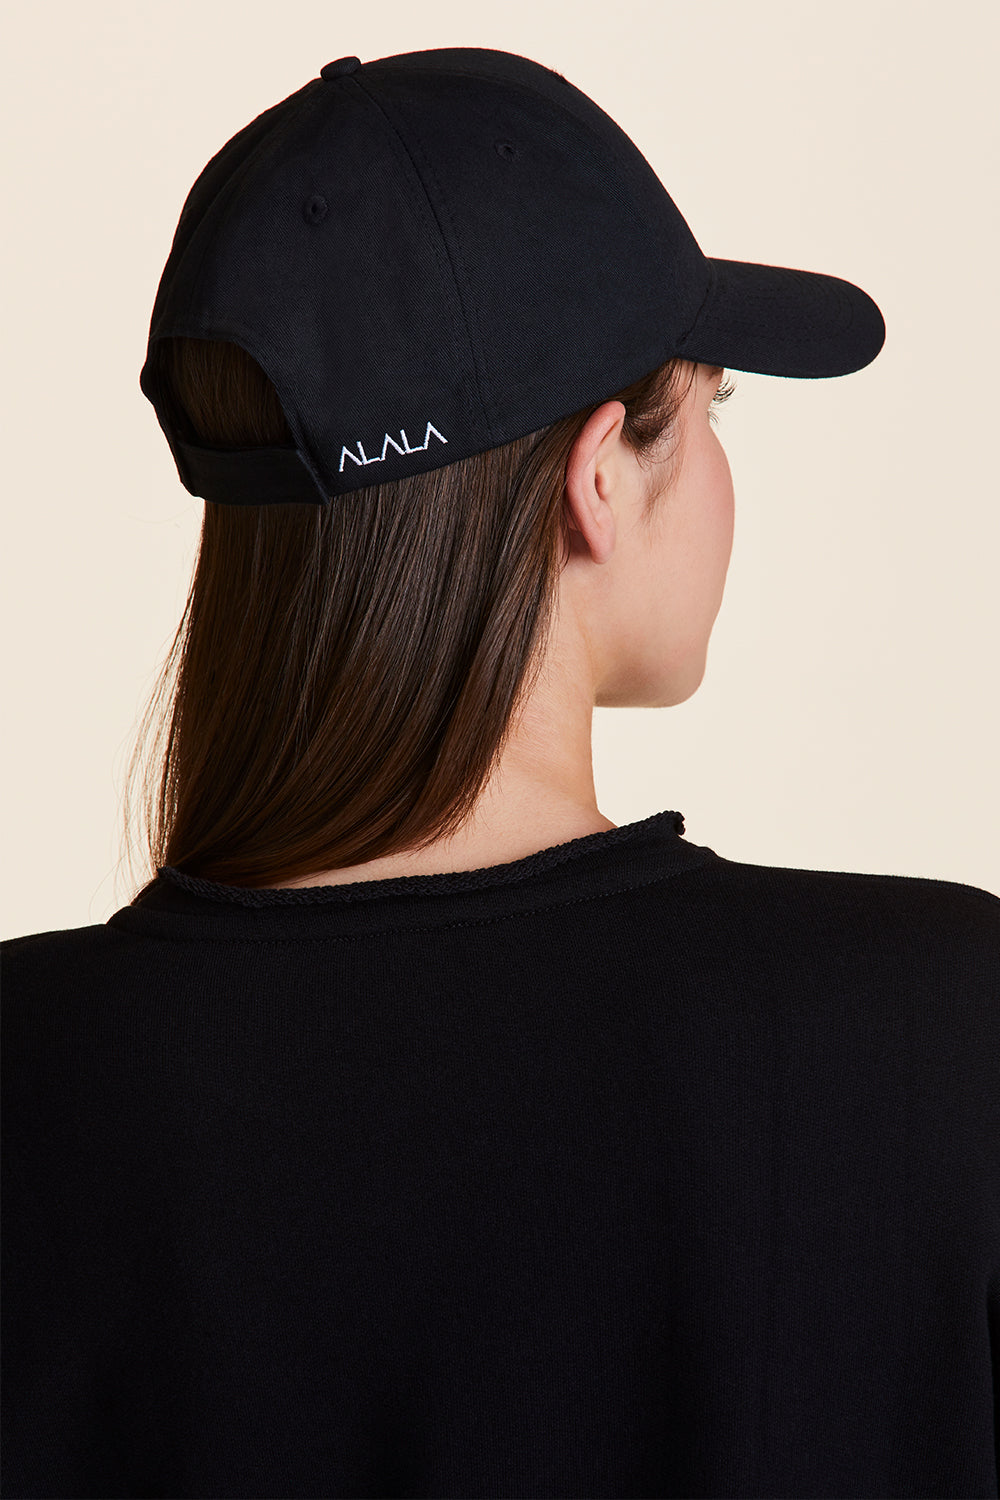 Back view of Alala Women's Luxury Athleisure all day baseball cap in black